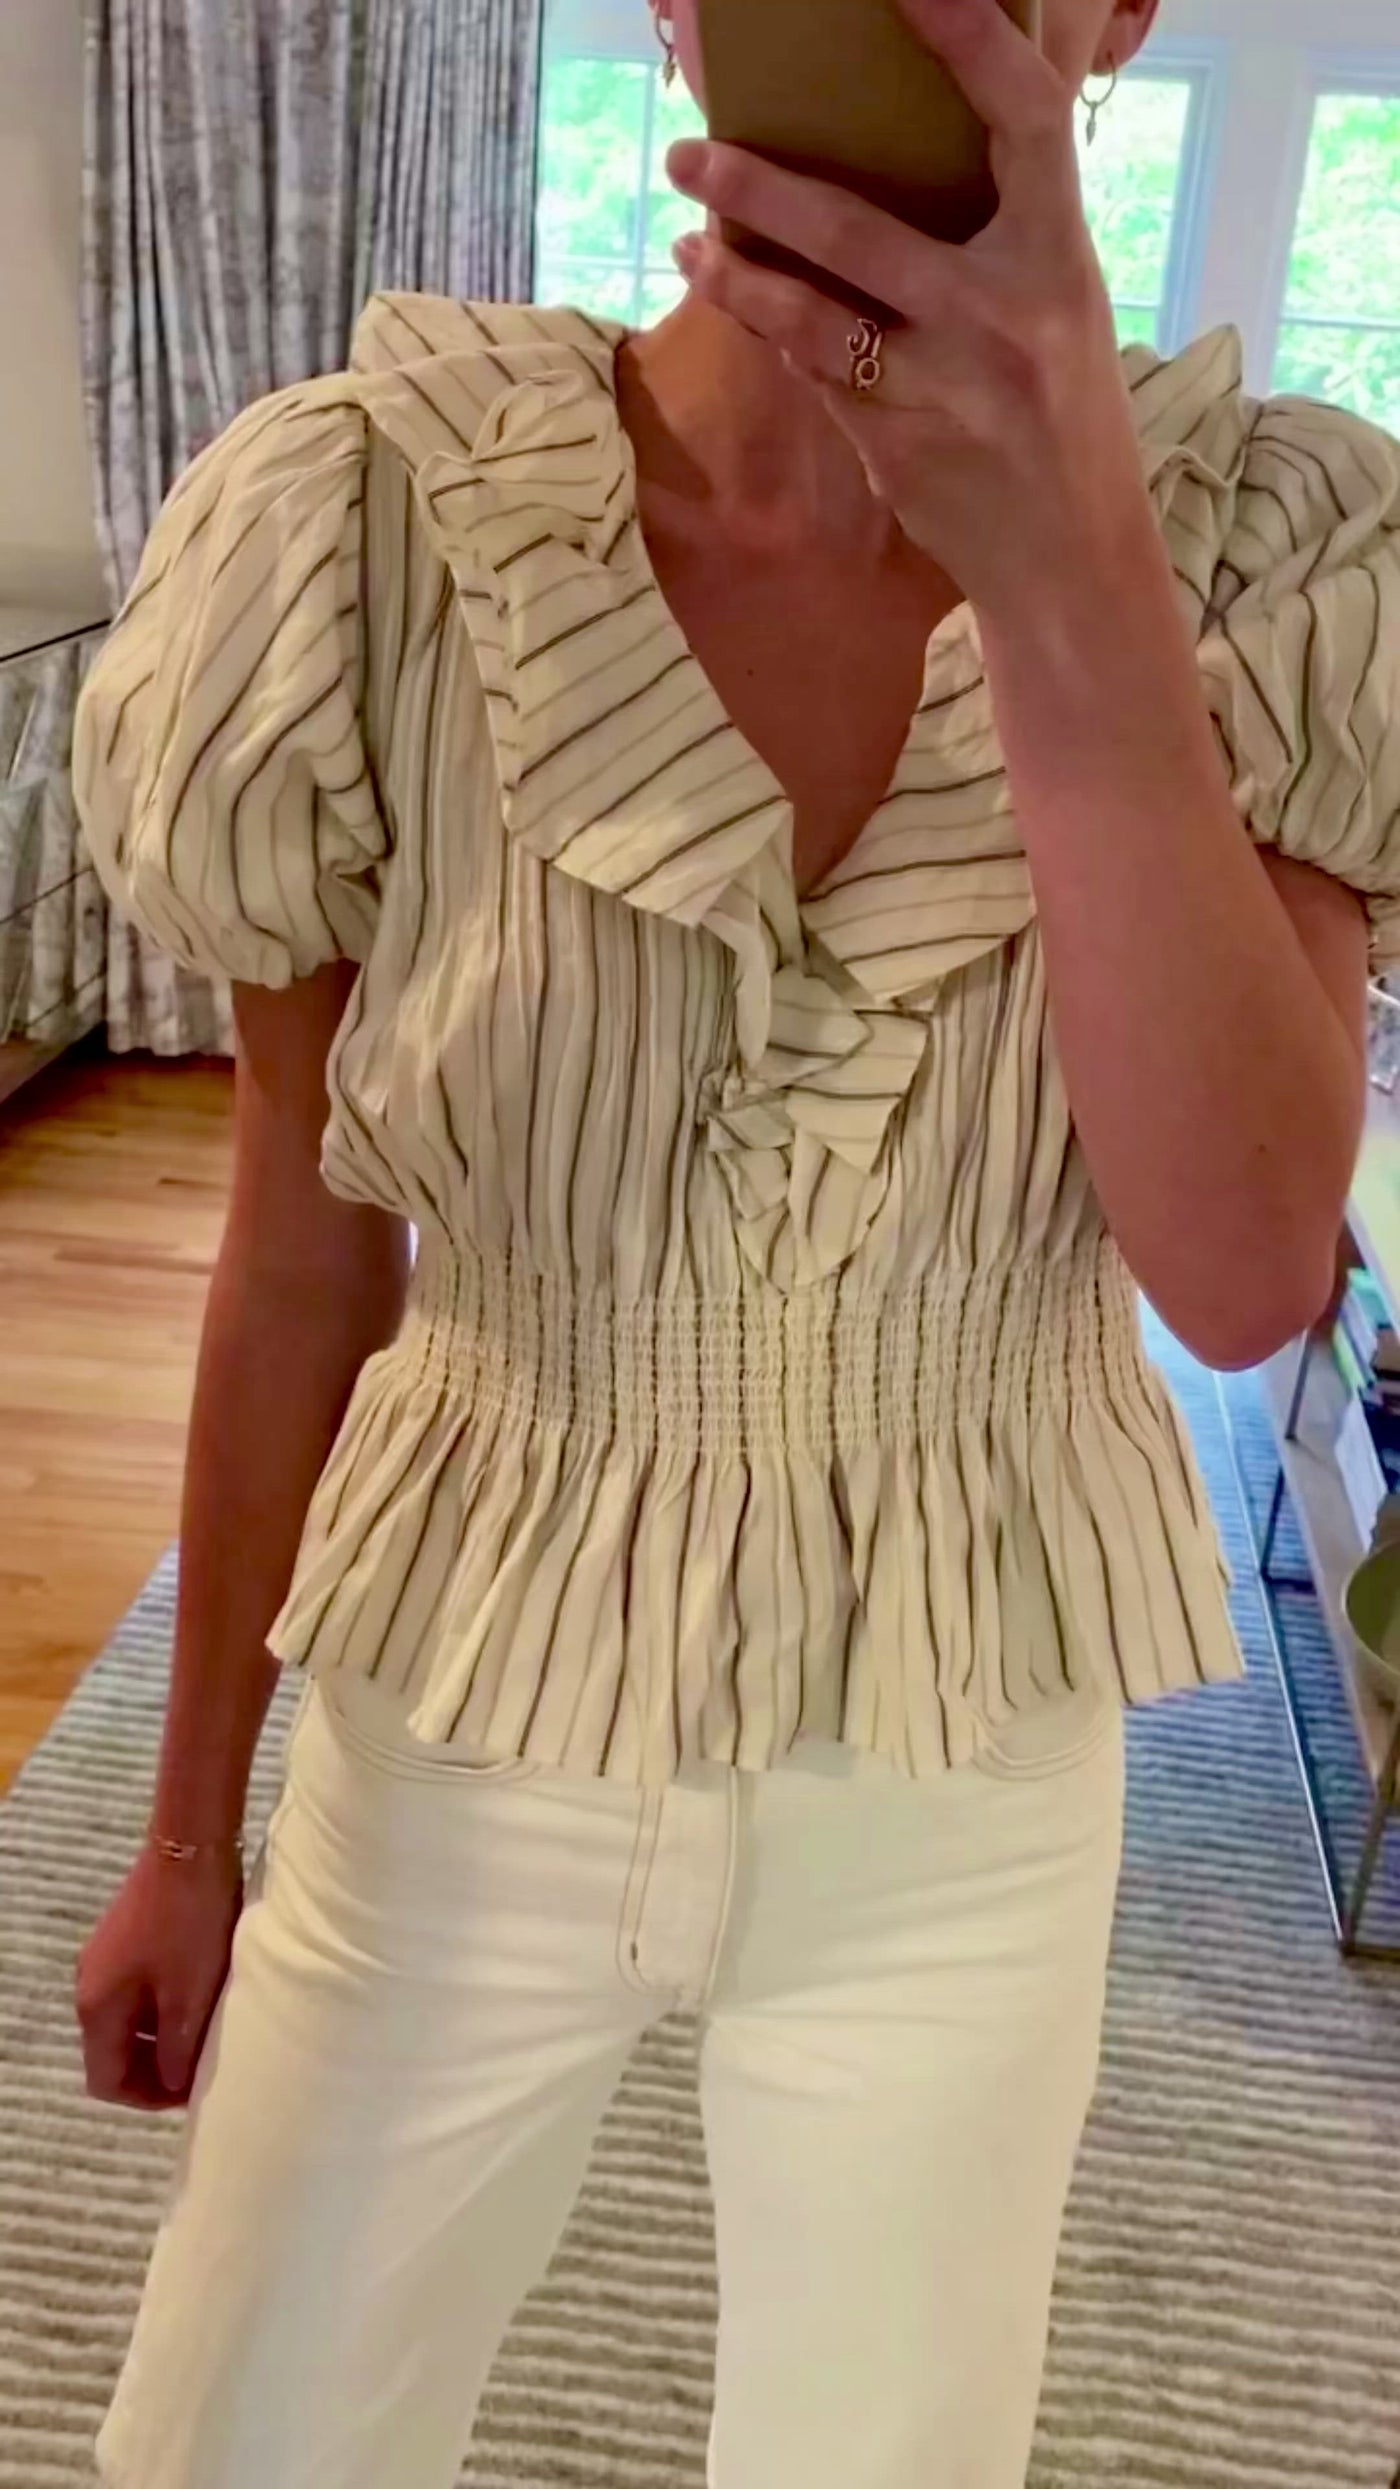 Video of the Danni Top styled 3 different ways